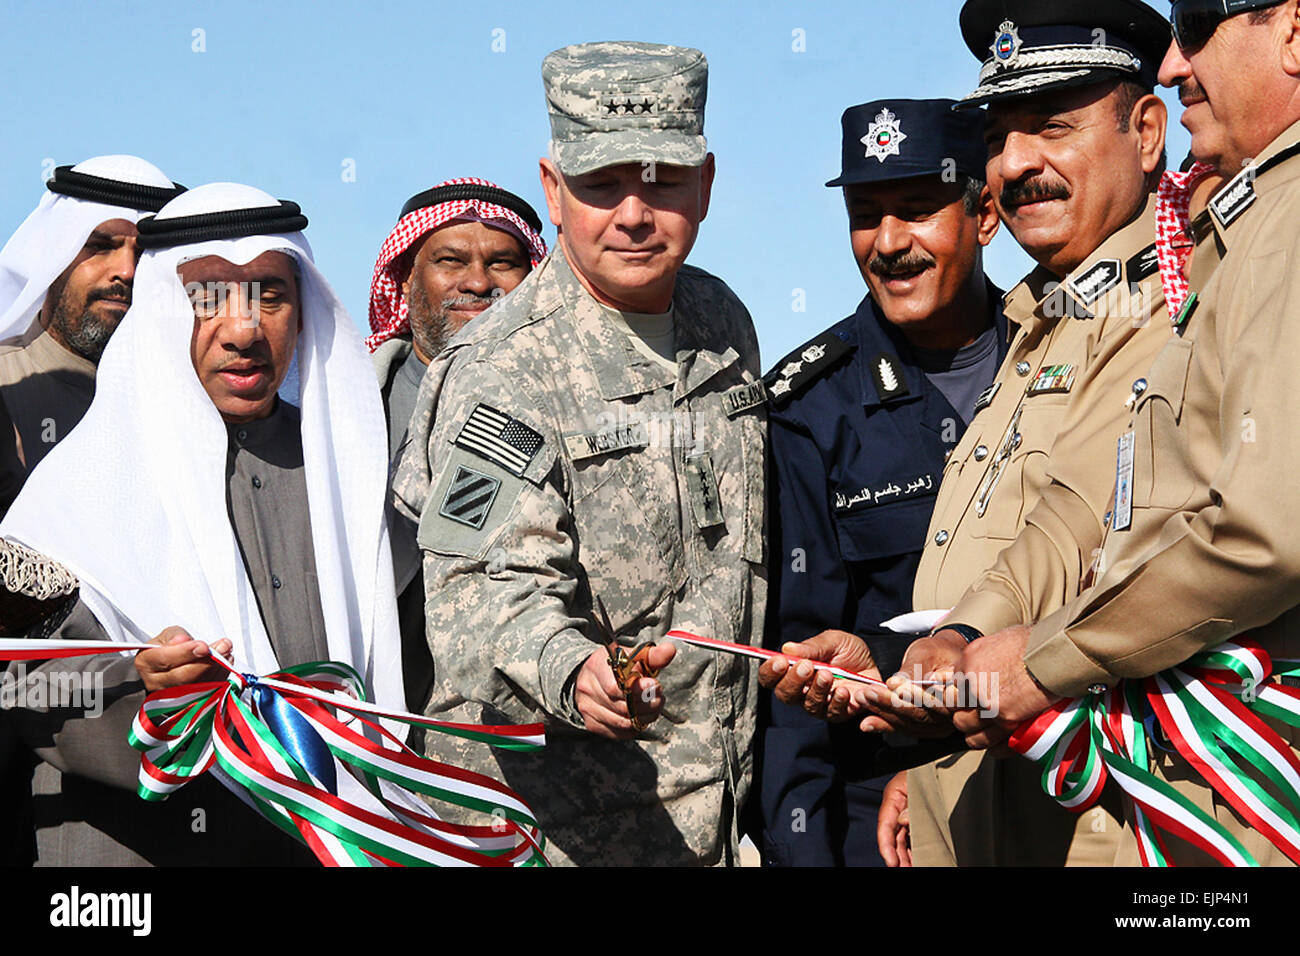 U.S. Army Lt. Gen. William G. Webster, the commanding general of Third Army, cuts a ribbon with Kuwait’s military and highway patrol personnel, Dec. 30, 2009, to celebrate the opening of a new military convoy route. The Kuwaiti government provided the route for U.S. troops traveling between camps across Kuwait.  Spc. Jason C. Adolphson Stock Photo